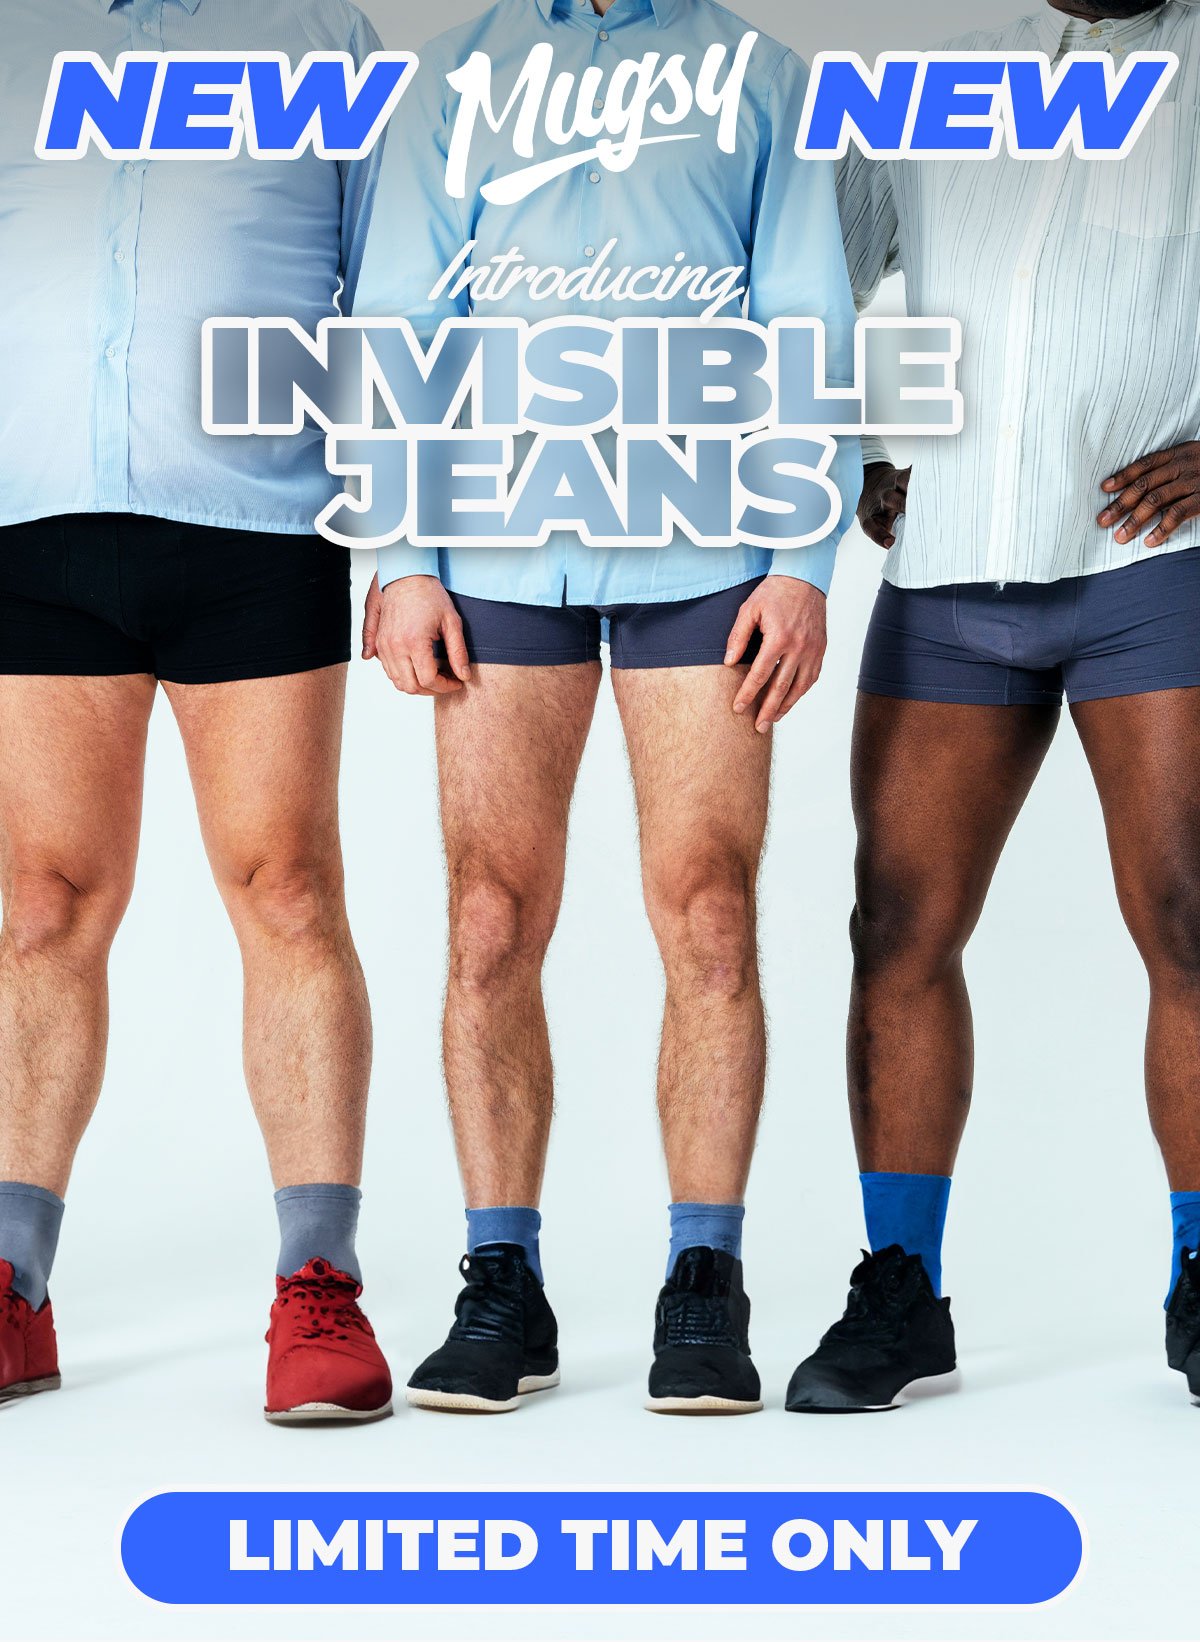 New Mugsy - Introducing Invisible Jeans. Image of three men in shirts, underwear, shoes and no pants. Button to shop invisible jeans for a limited time only.